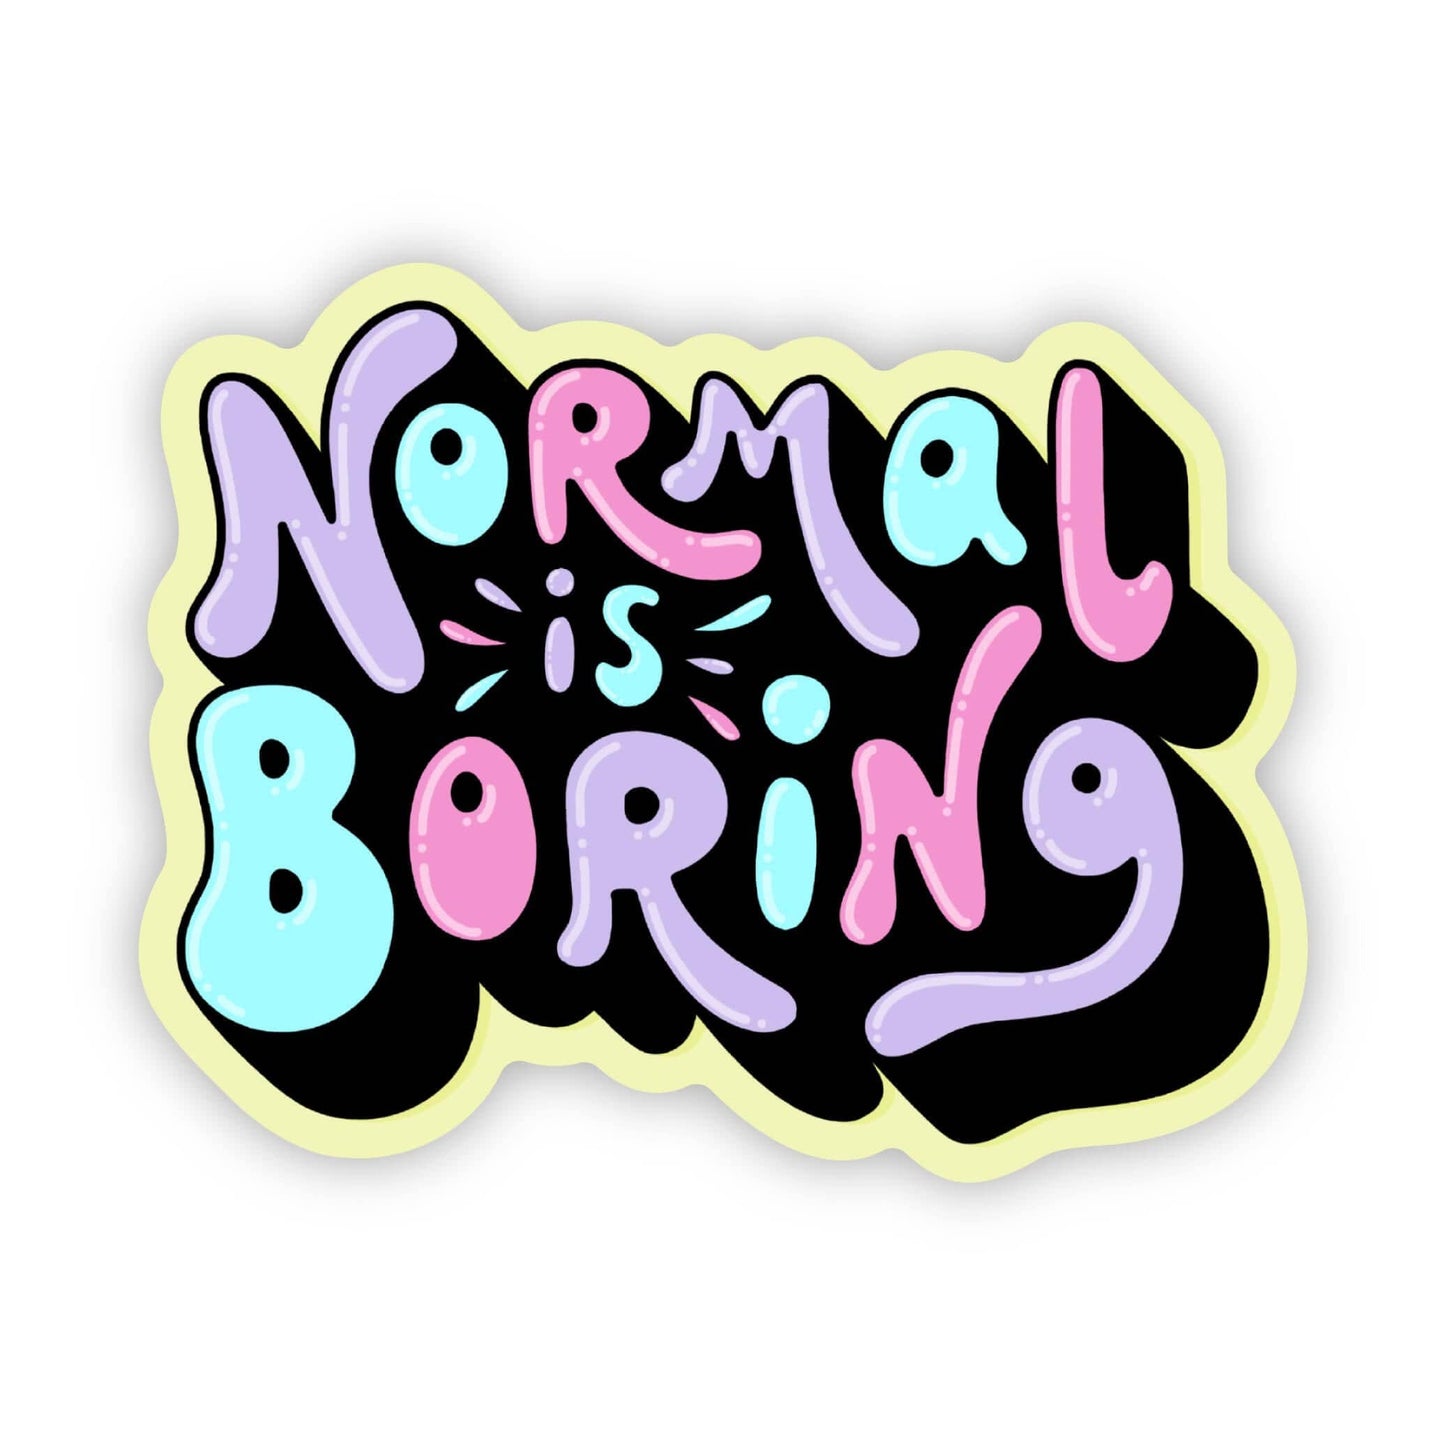 "Normal is boring" sticker